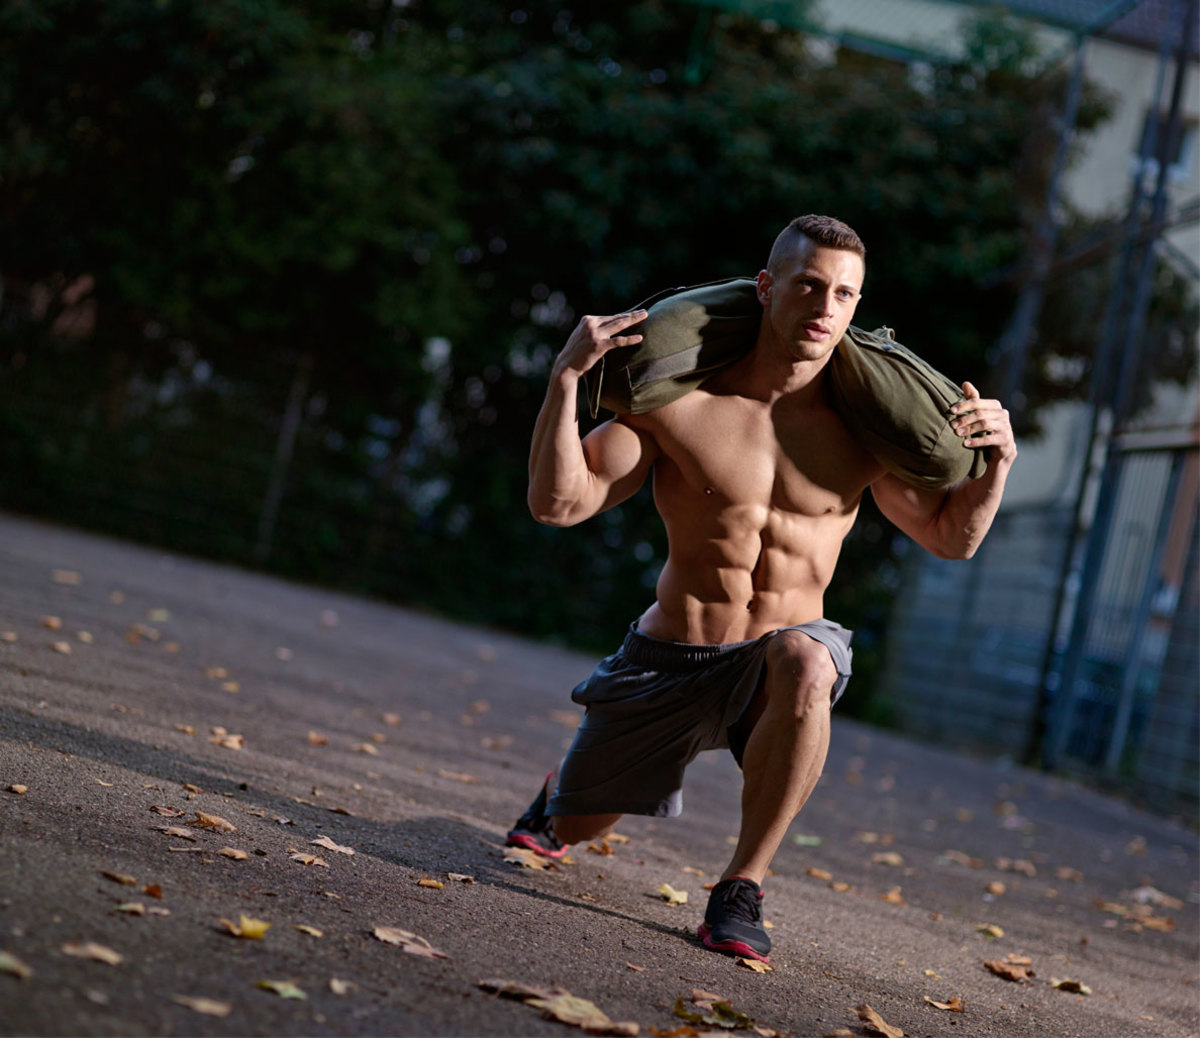 Outdoor Workouts to Burn Fat and Build Muscle